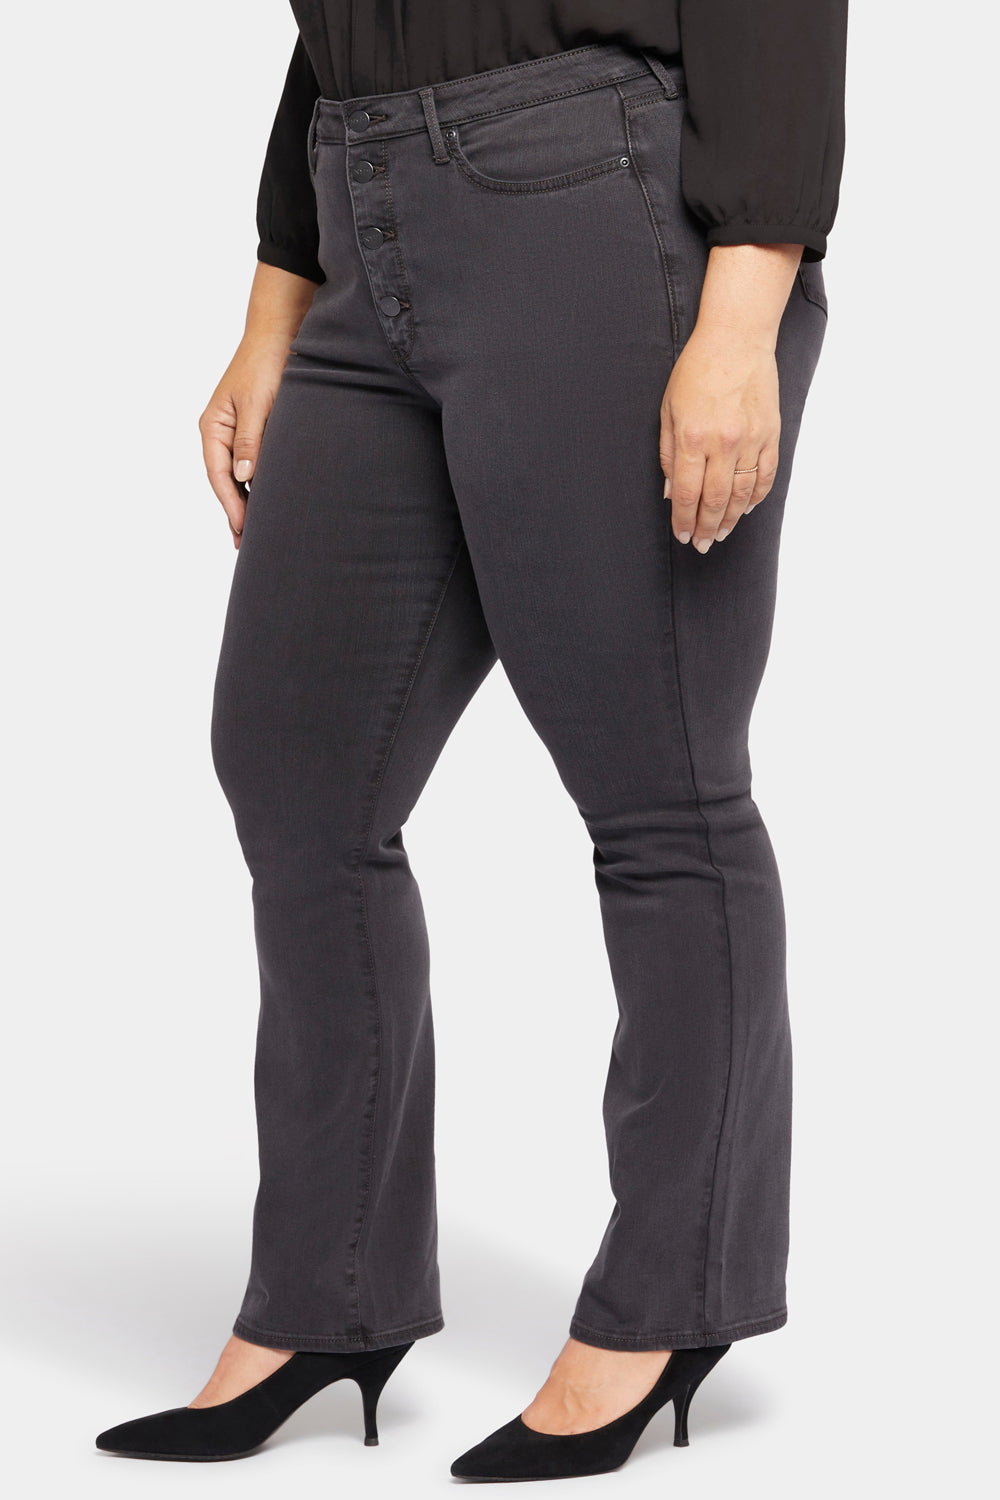 NYDJ Barbara Bootcut Jeans In Plus Size In Sure Stretch® Denim With Exposed Button Fly - Sierra